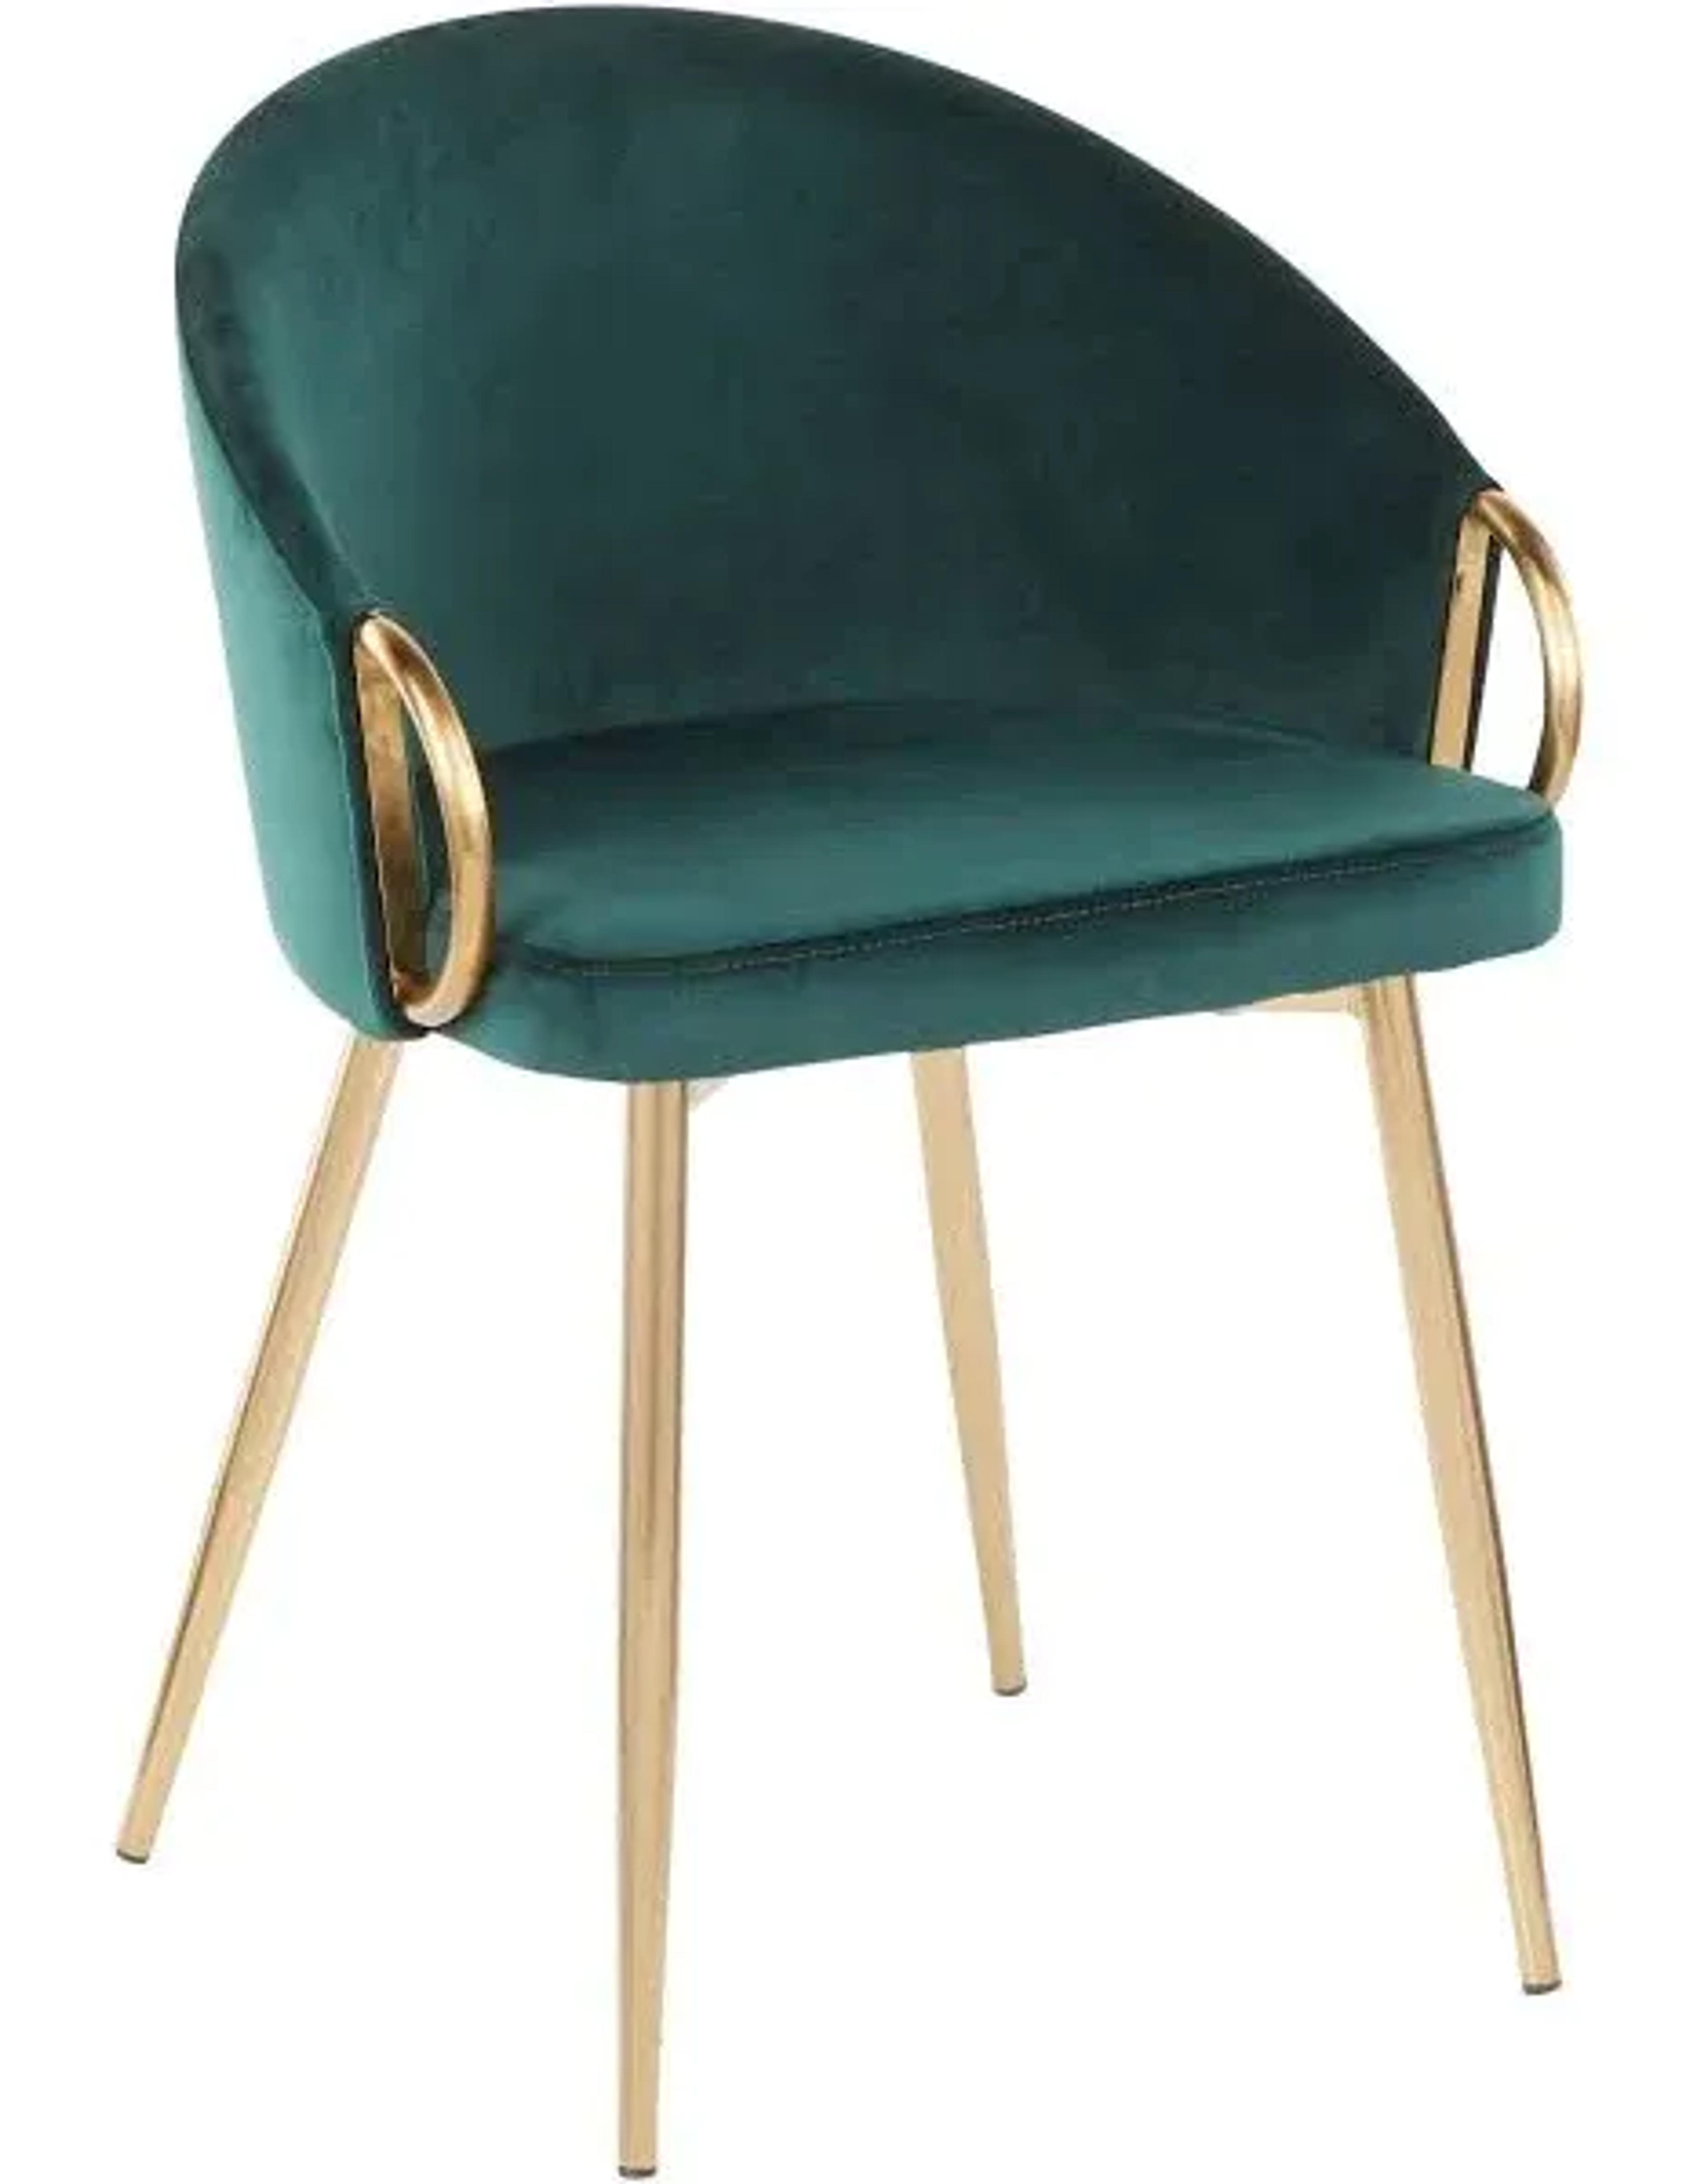 Lumisource Claire Gold Emerald Green Chair • Spoken • Never overpay online